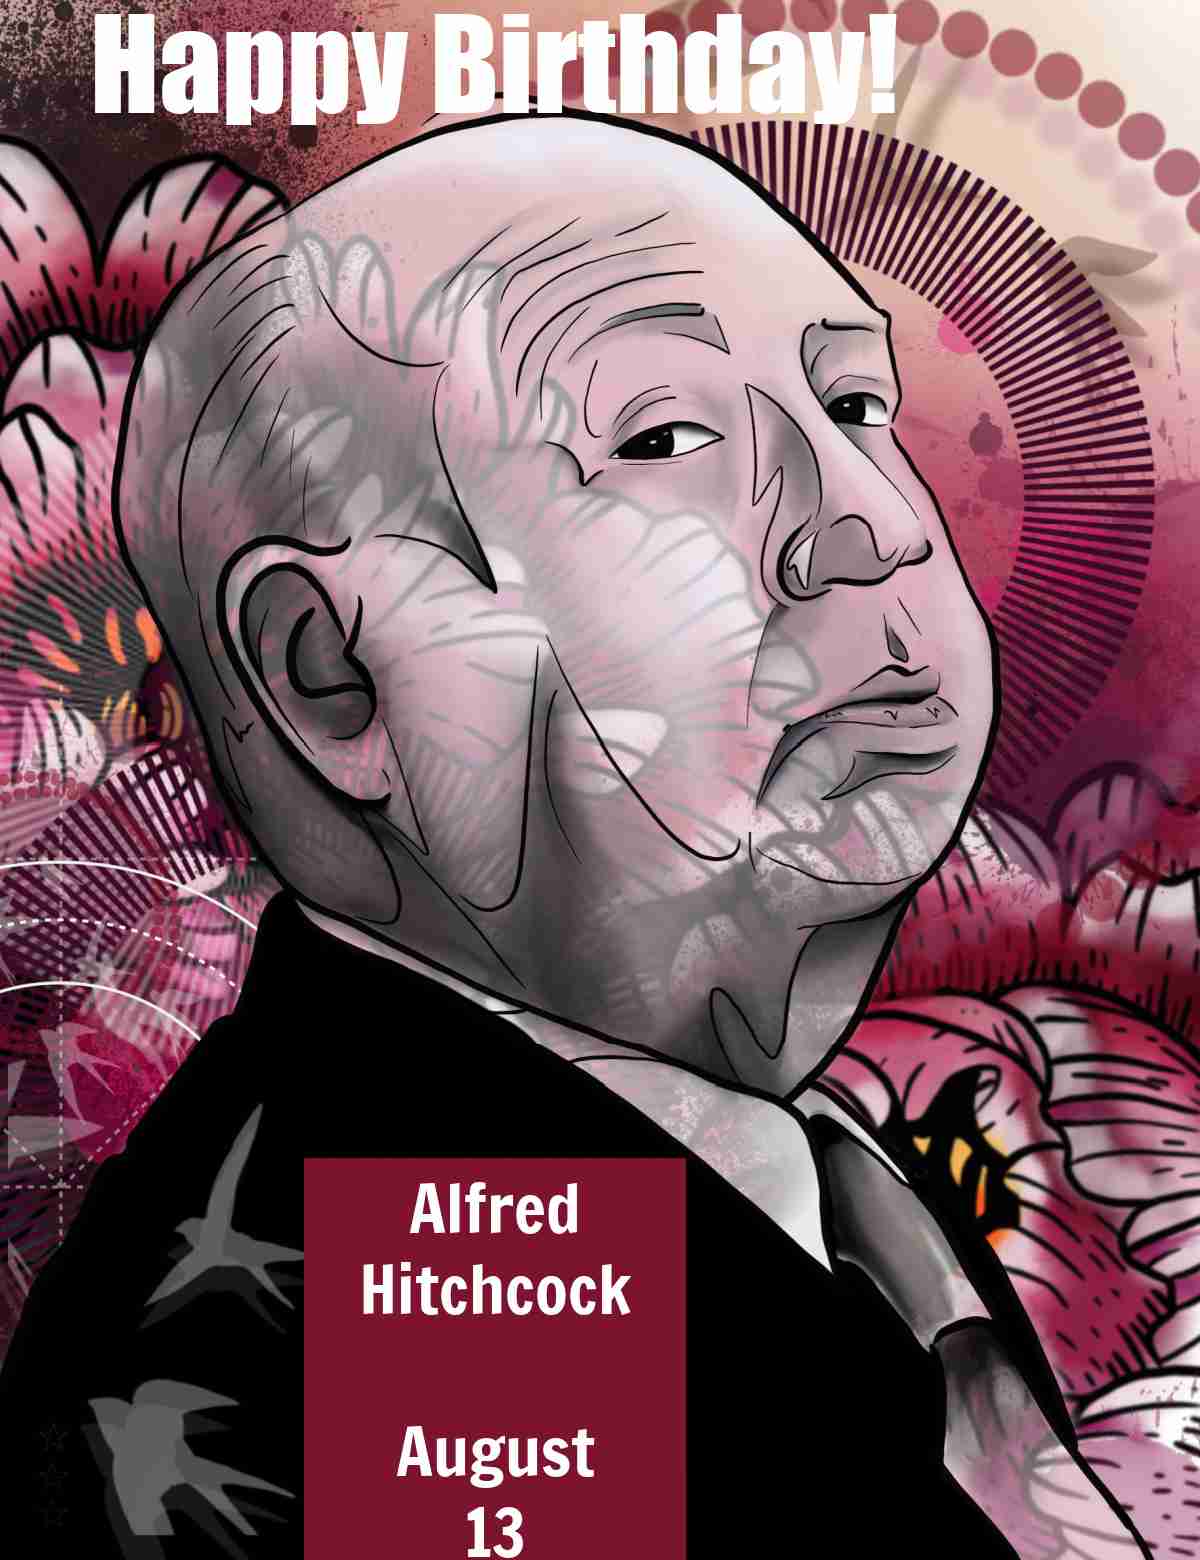 Image of Alfred Hitchcock with words Happy Birthday, August 13.